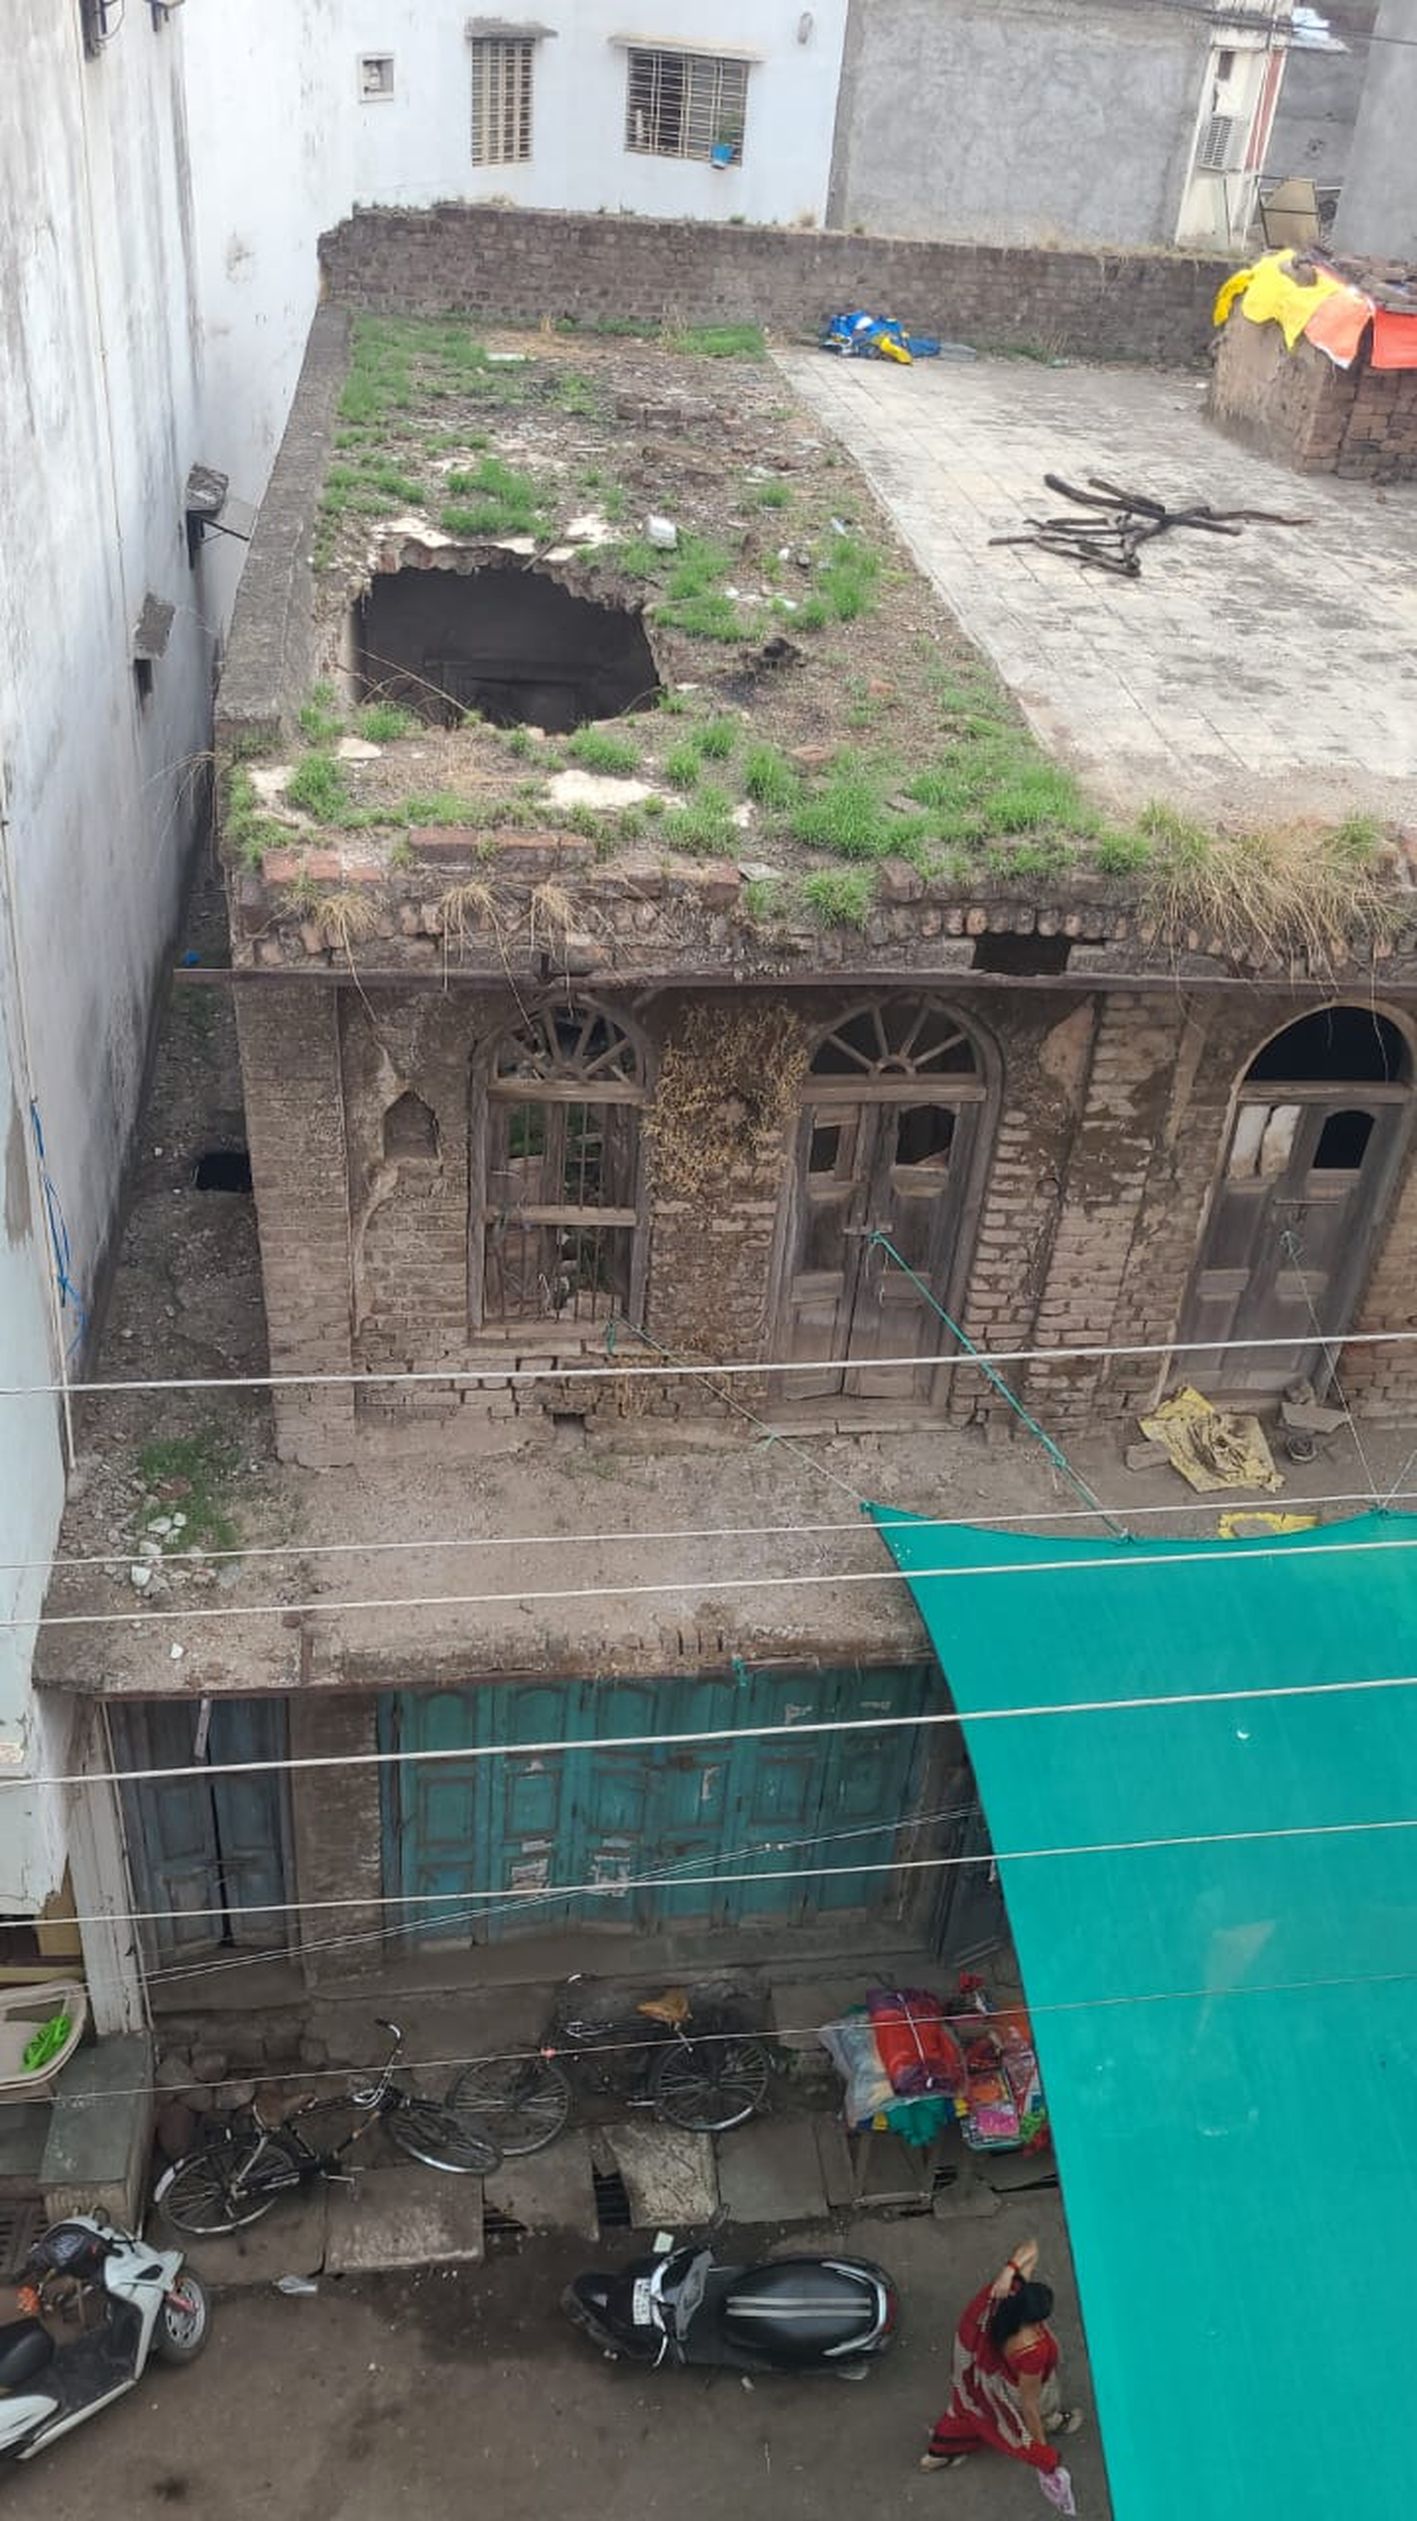 14 families forced to live in dilapidated house